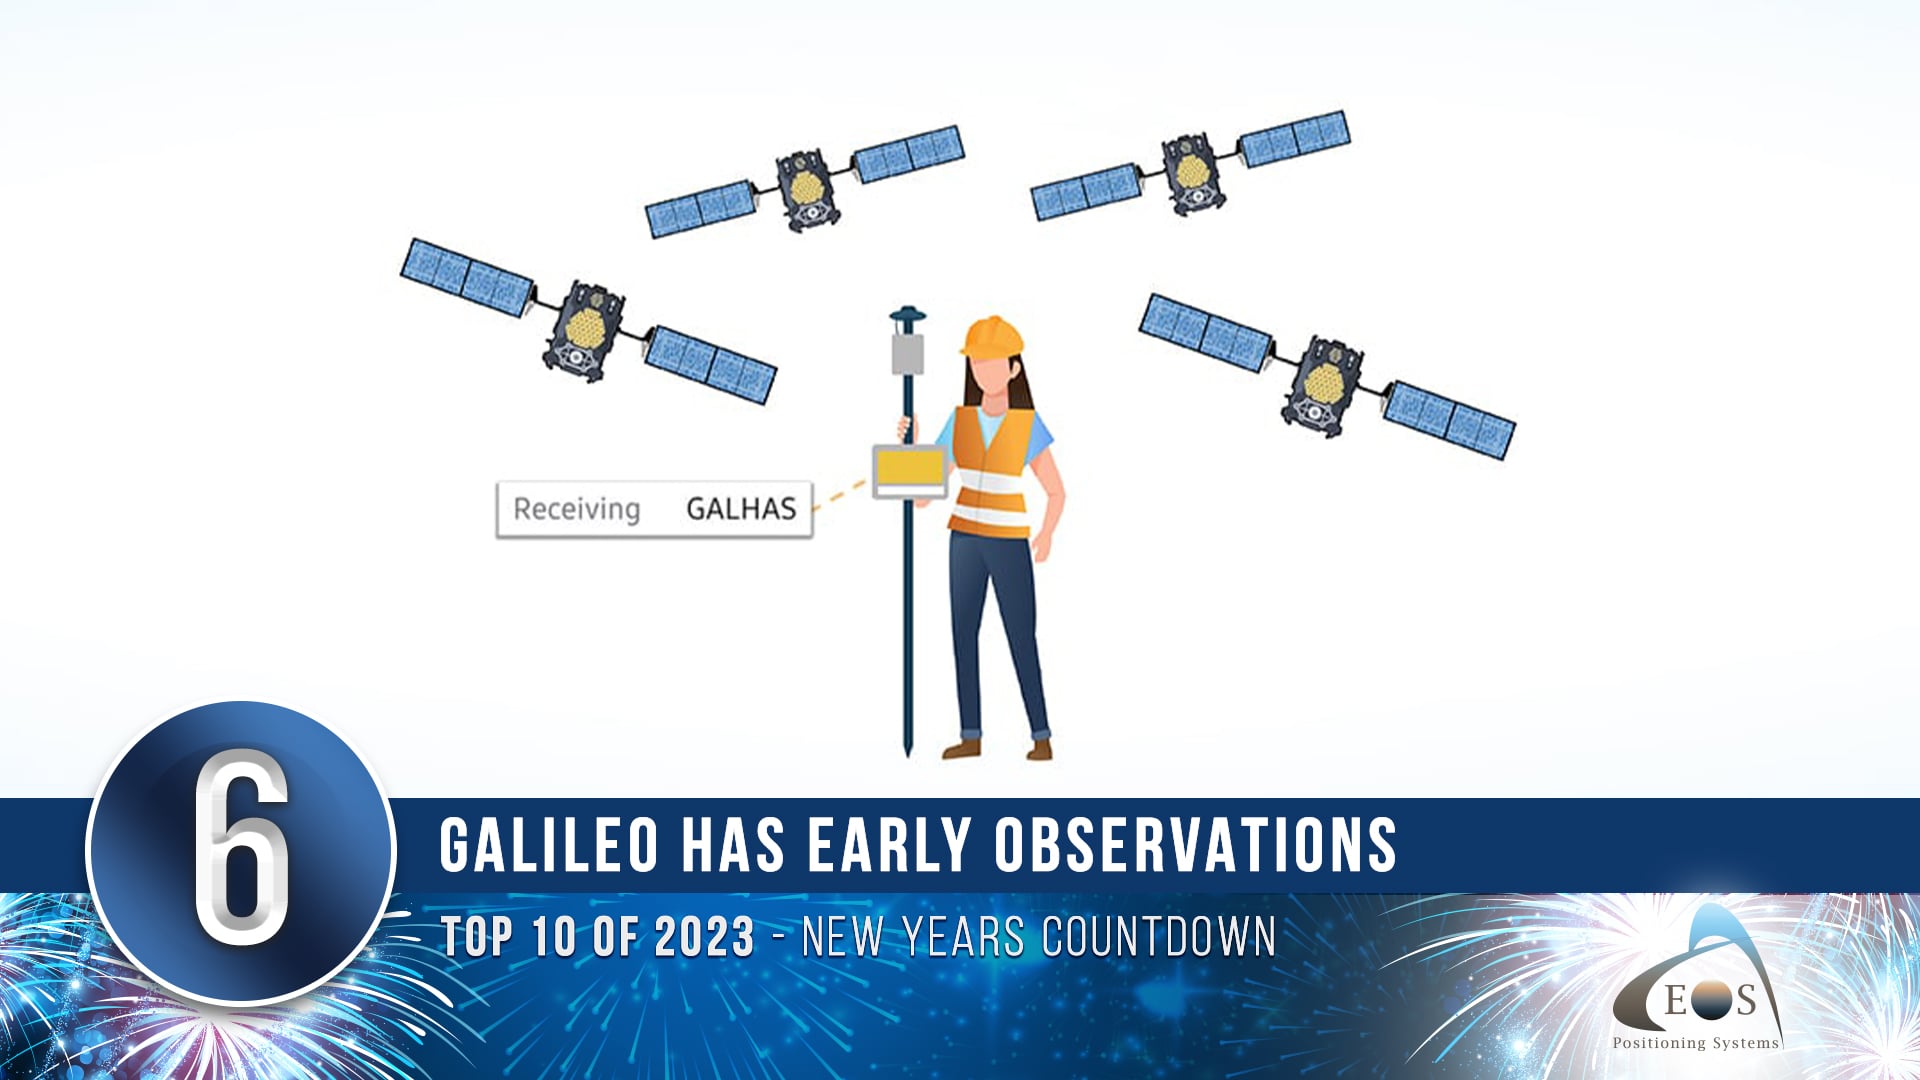 6 - Galileo HAS High Accuracy Service Early Observations Top 10 of 2023